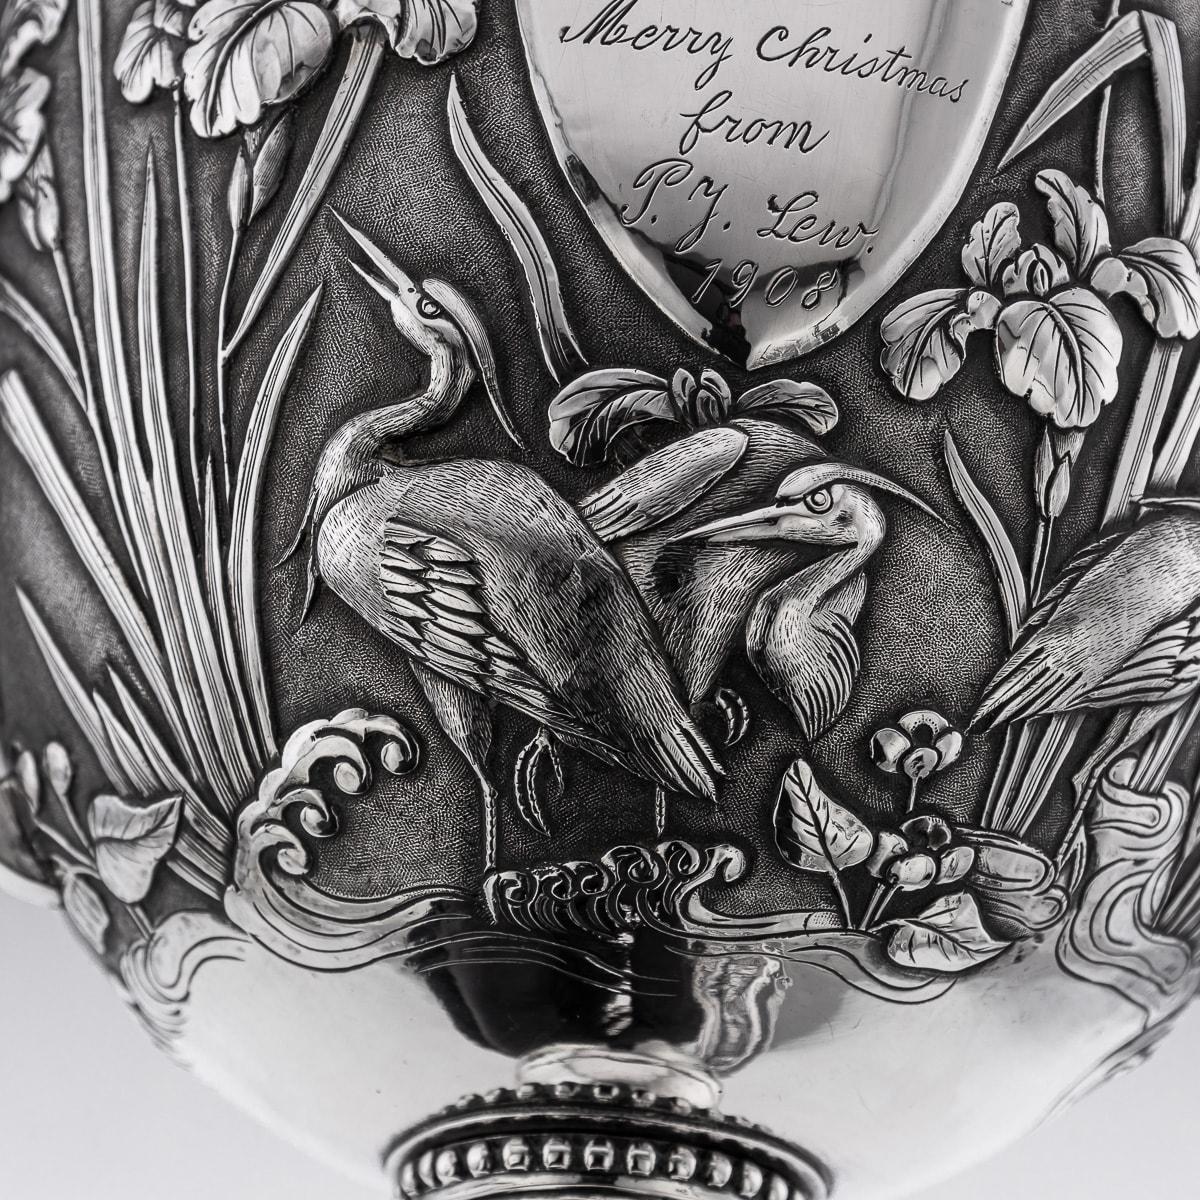 20th Century Chinese Export Solid Silver Trophy Cup, Woshing, Shanghai c.1900 For Sale 9